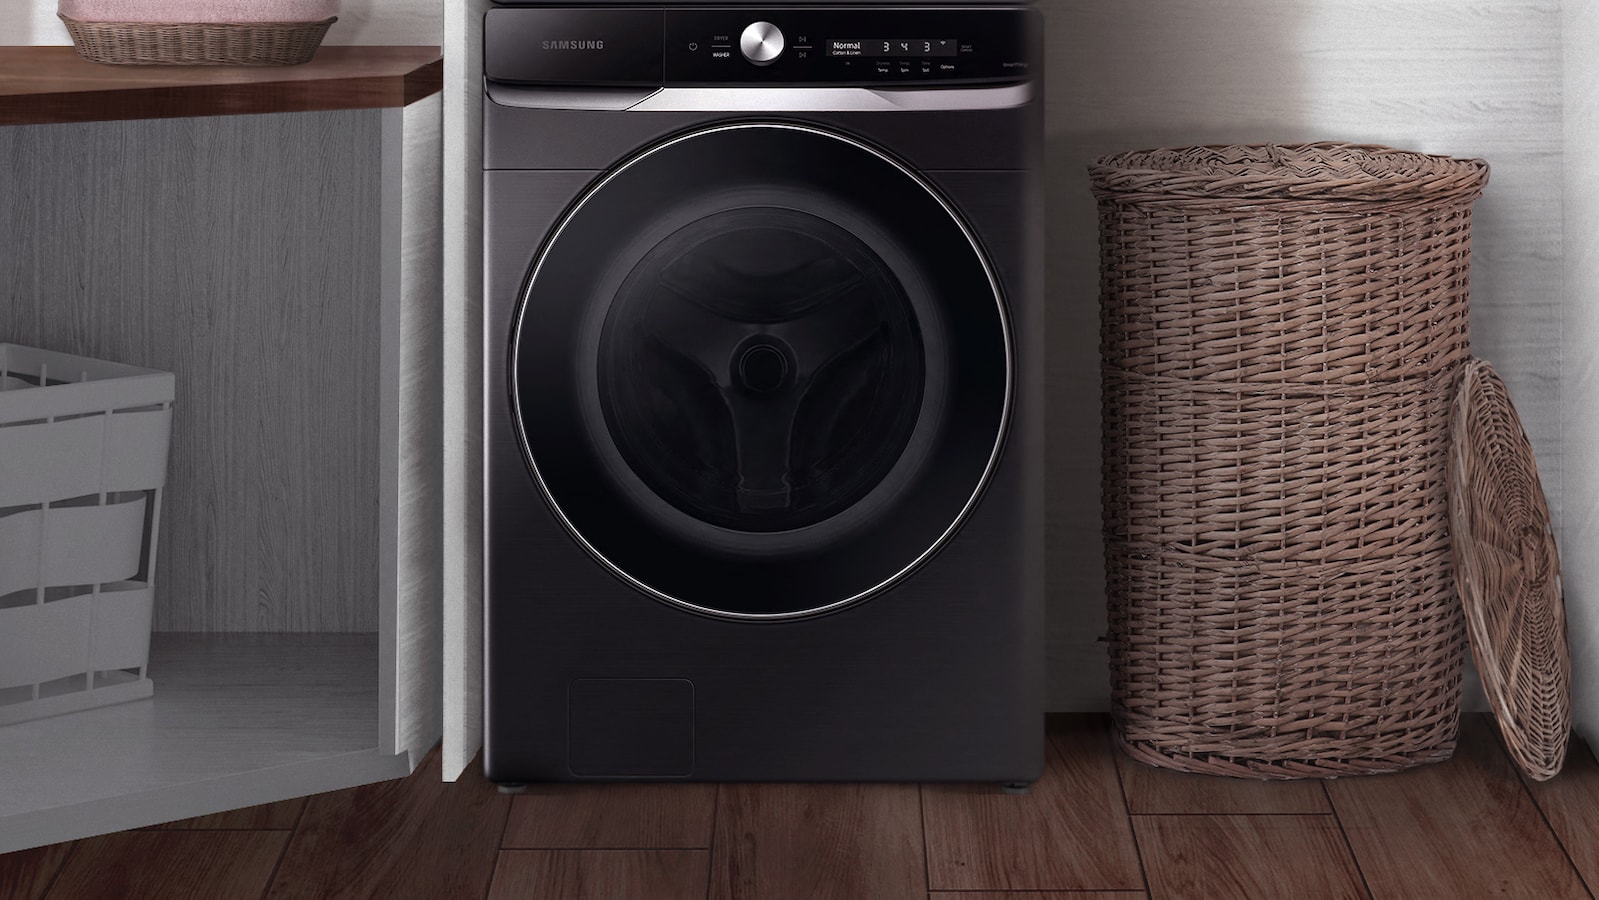 Samsung Smart Dryers: Connected Drying Features